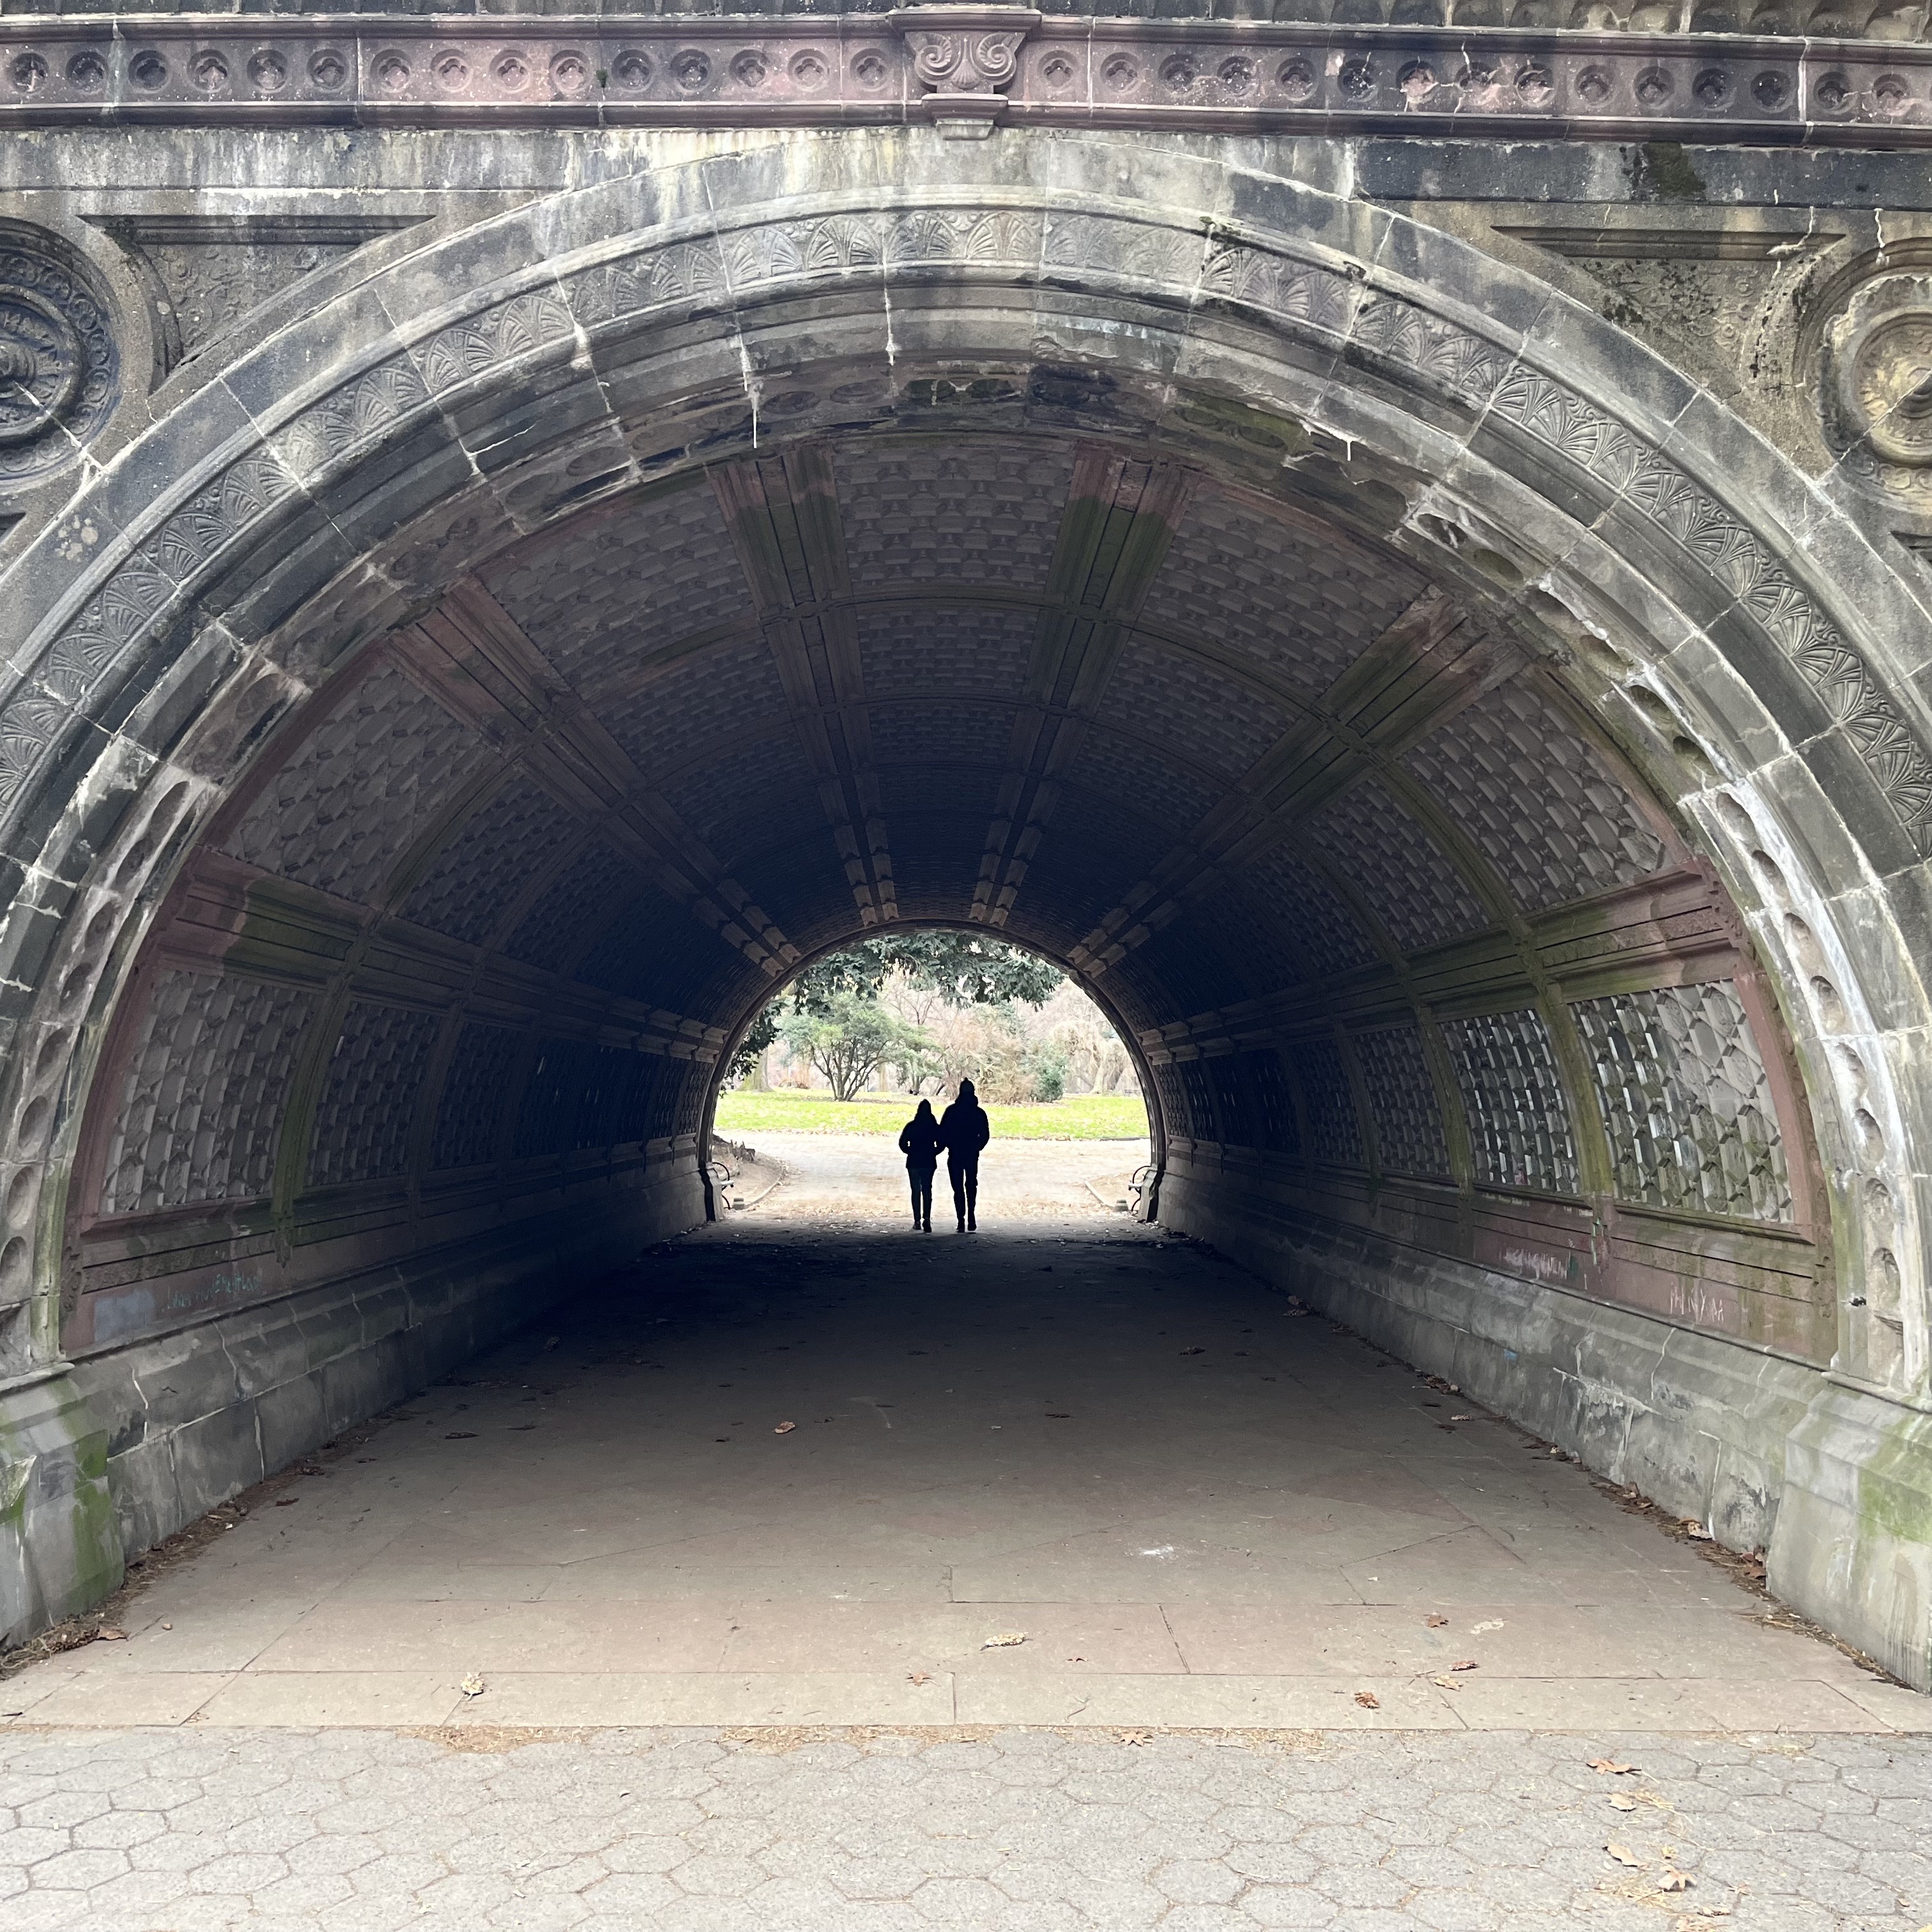 Cleft Ridge Span. Completed in 1872, this is the first cast concrete structure in the US. Prospect Park, Brooklyn.